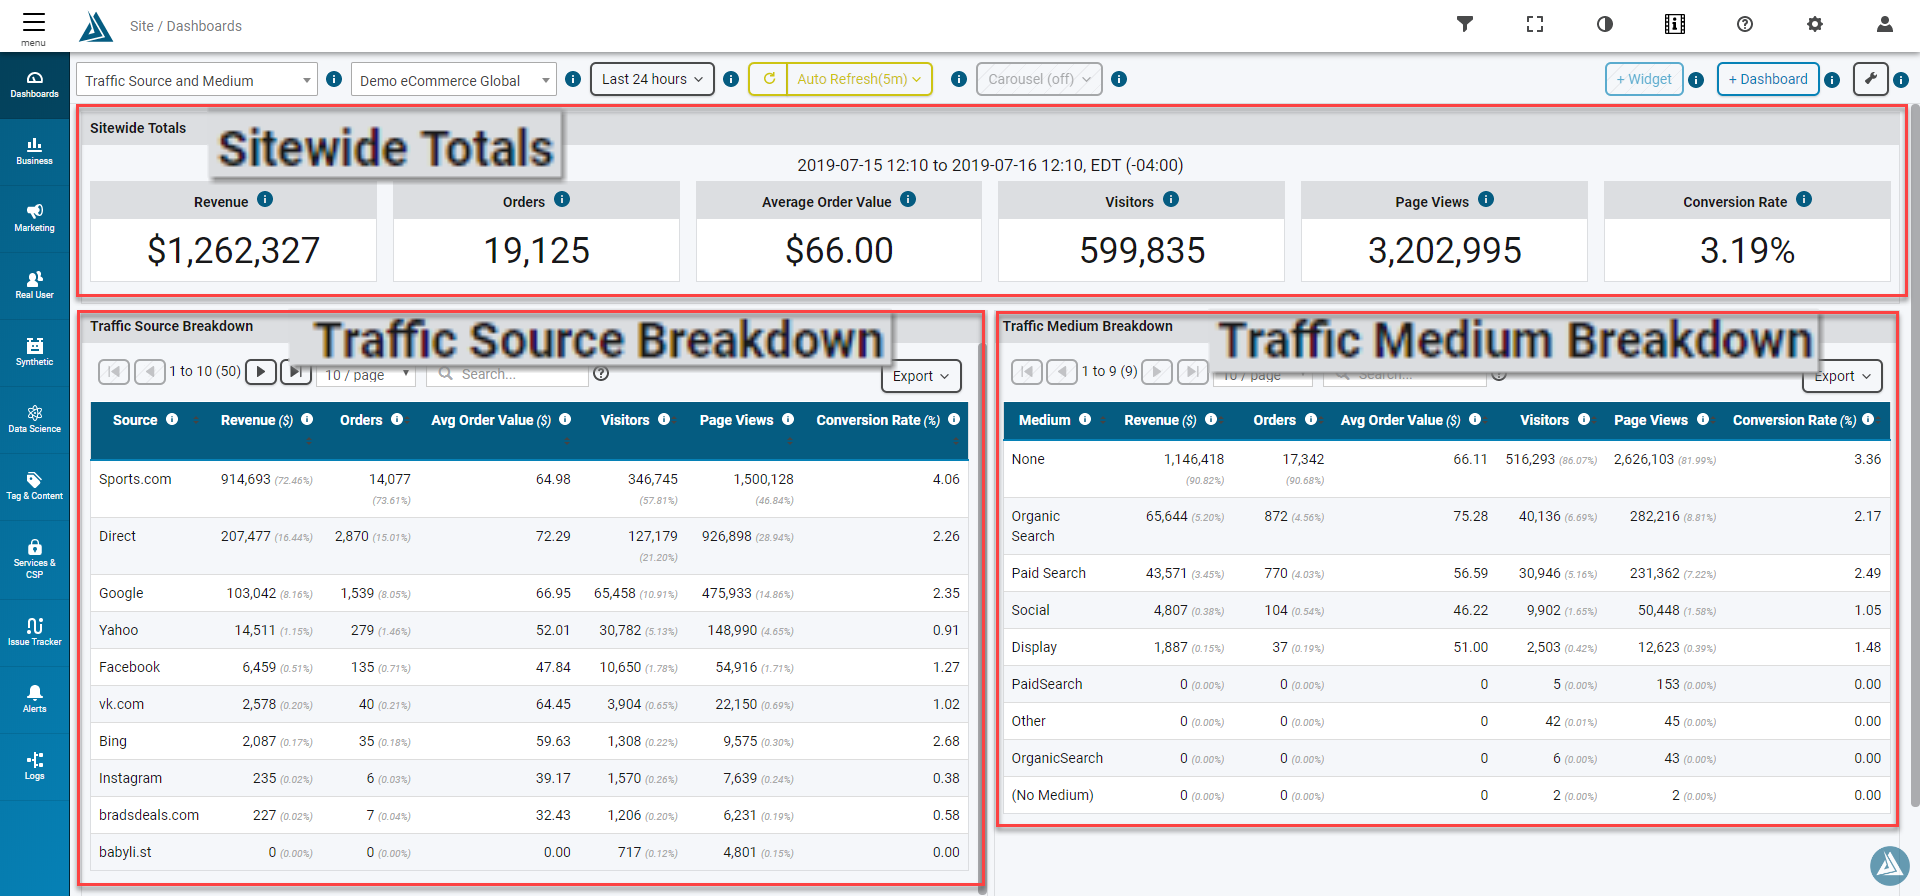 Traffic_Source_and_Medium_Dashboard_-_4_Dashboard_Details.png